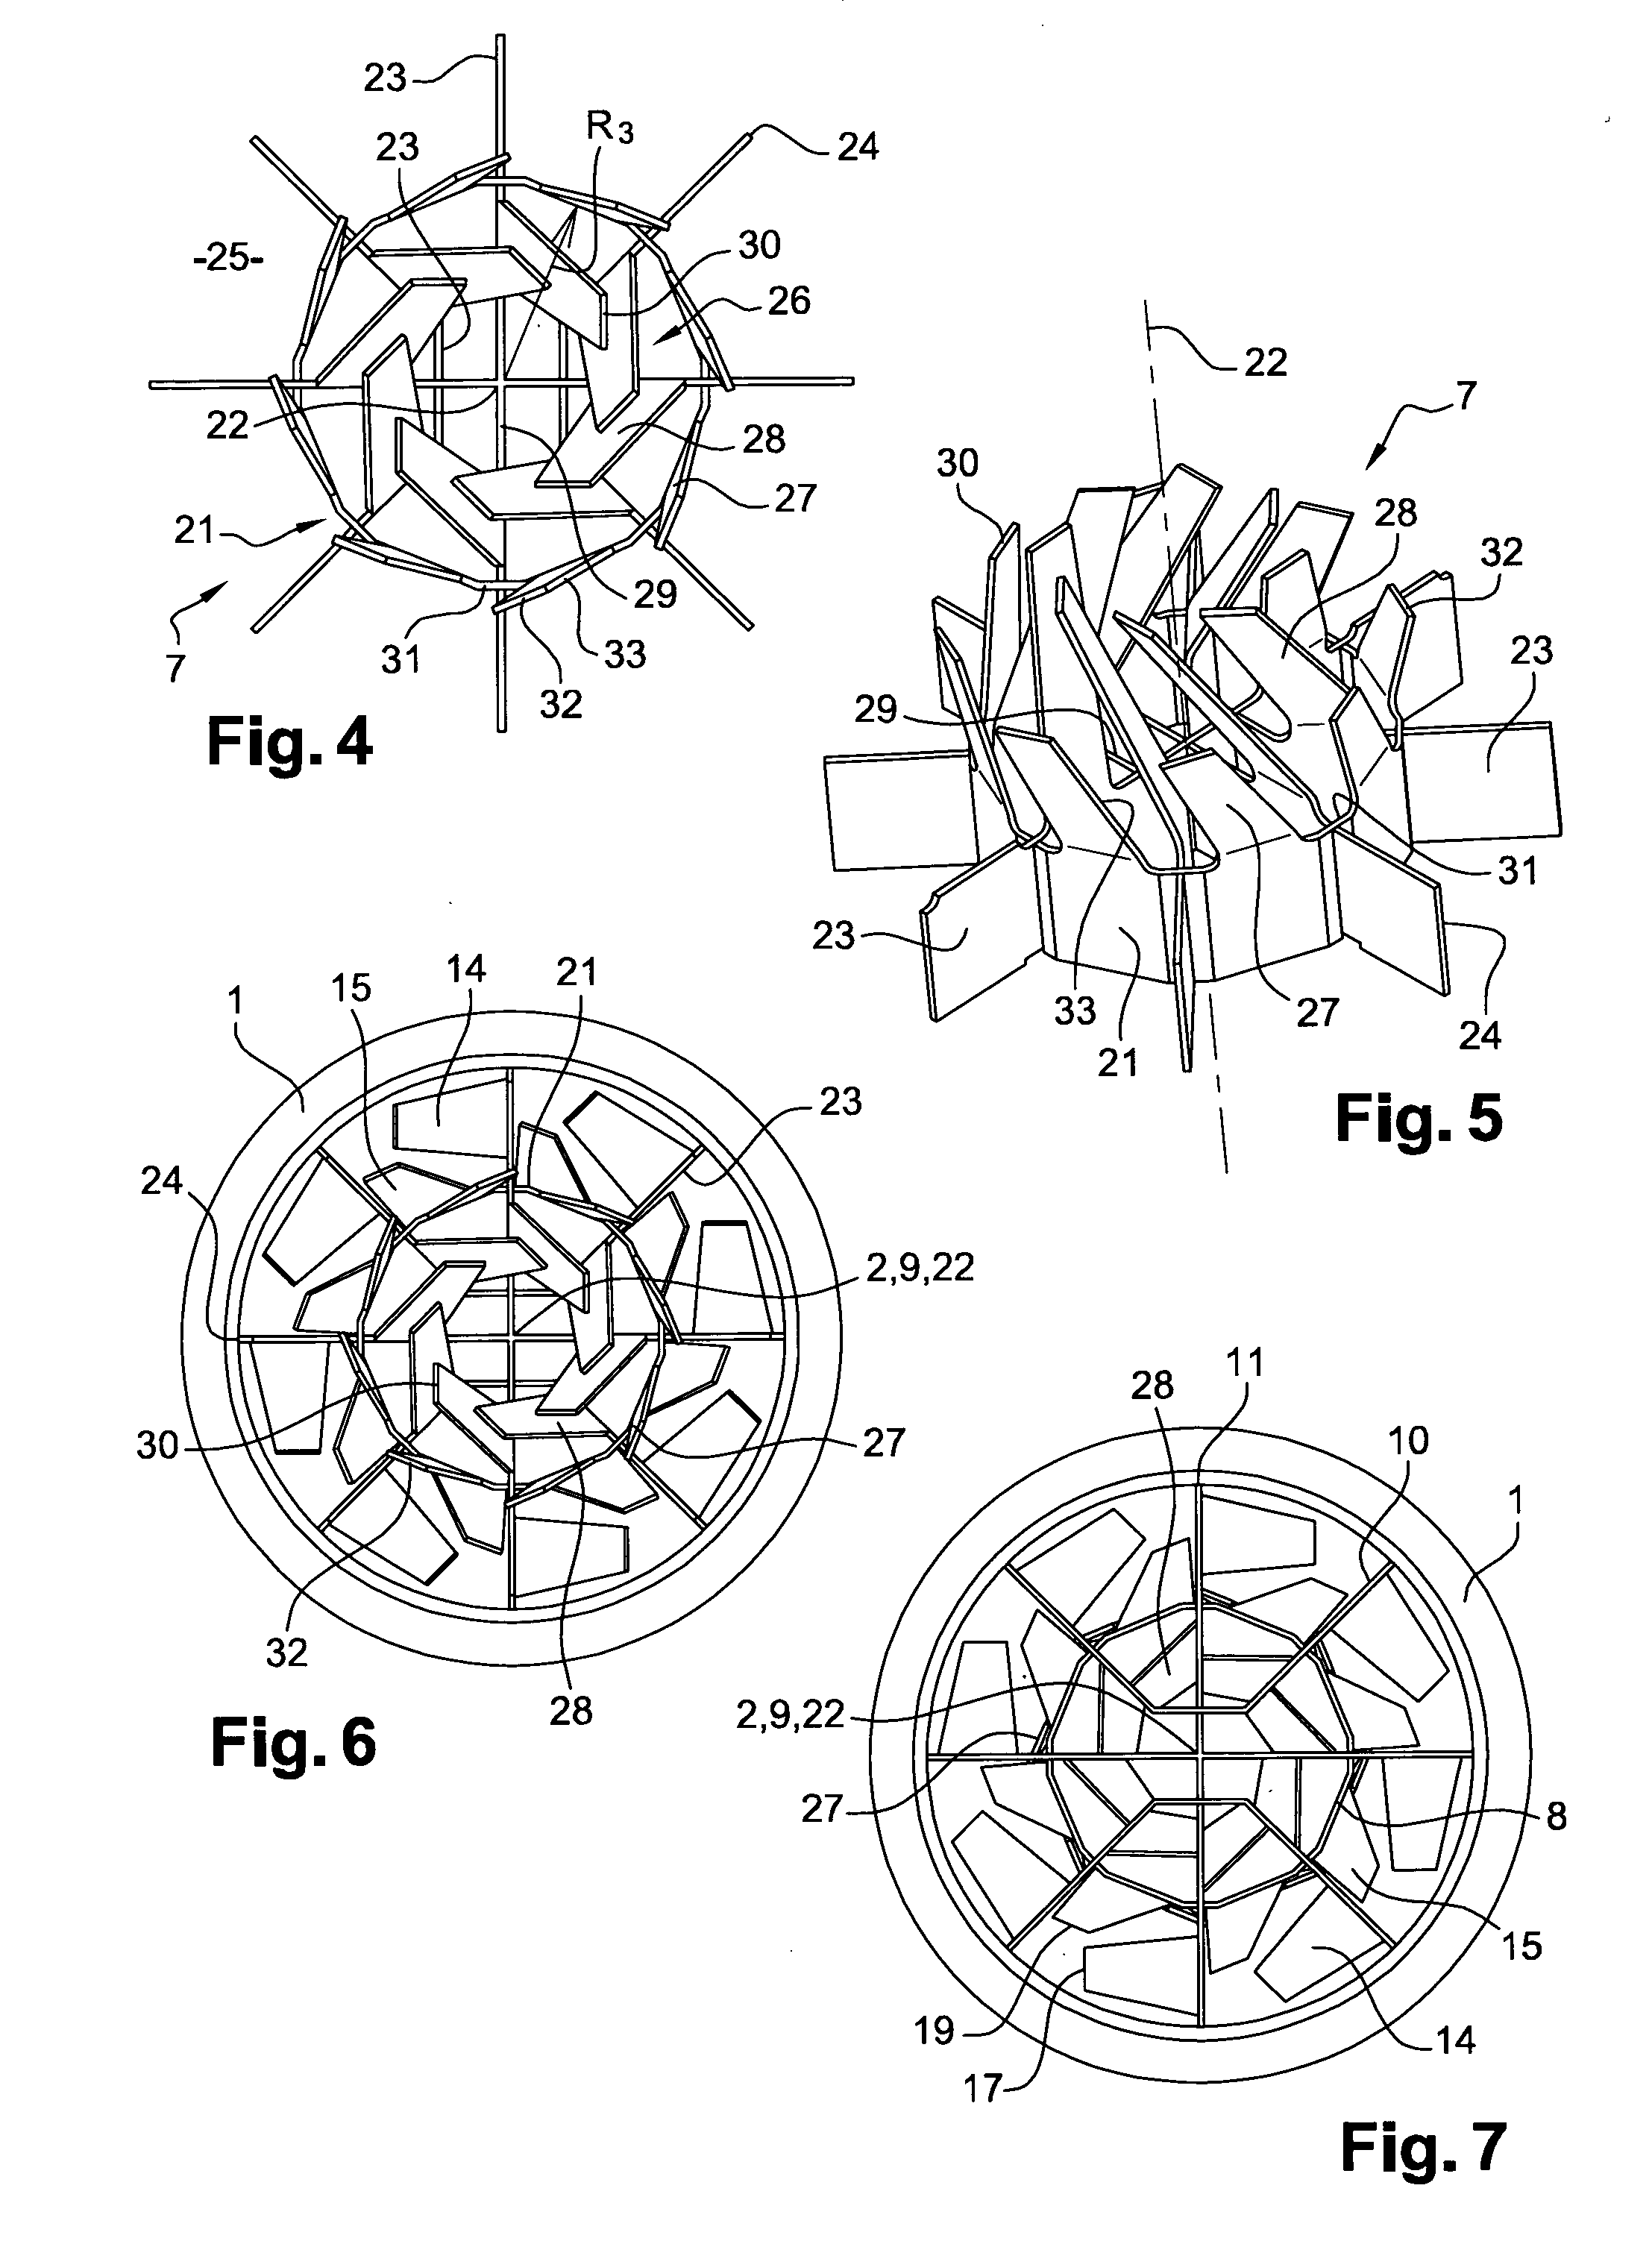 Mixing system for an exhaust gases after-treatment arrangement